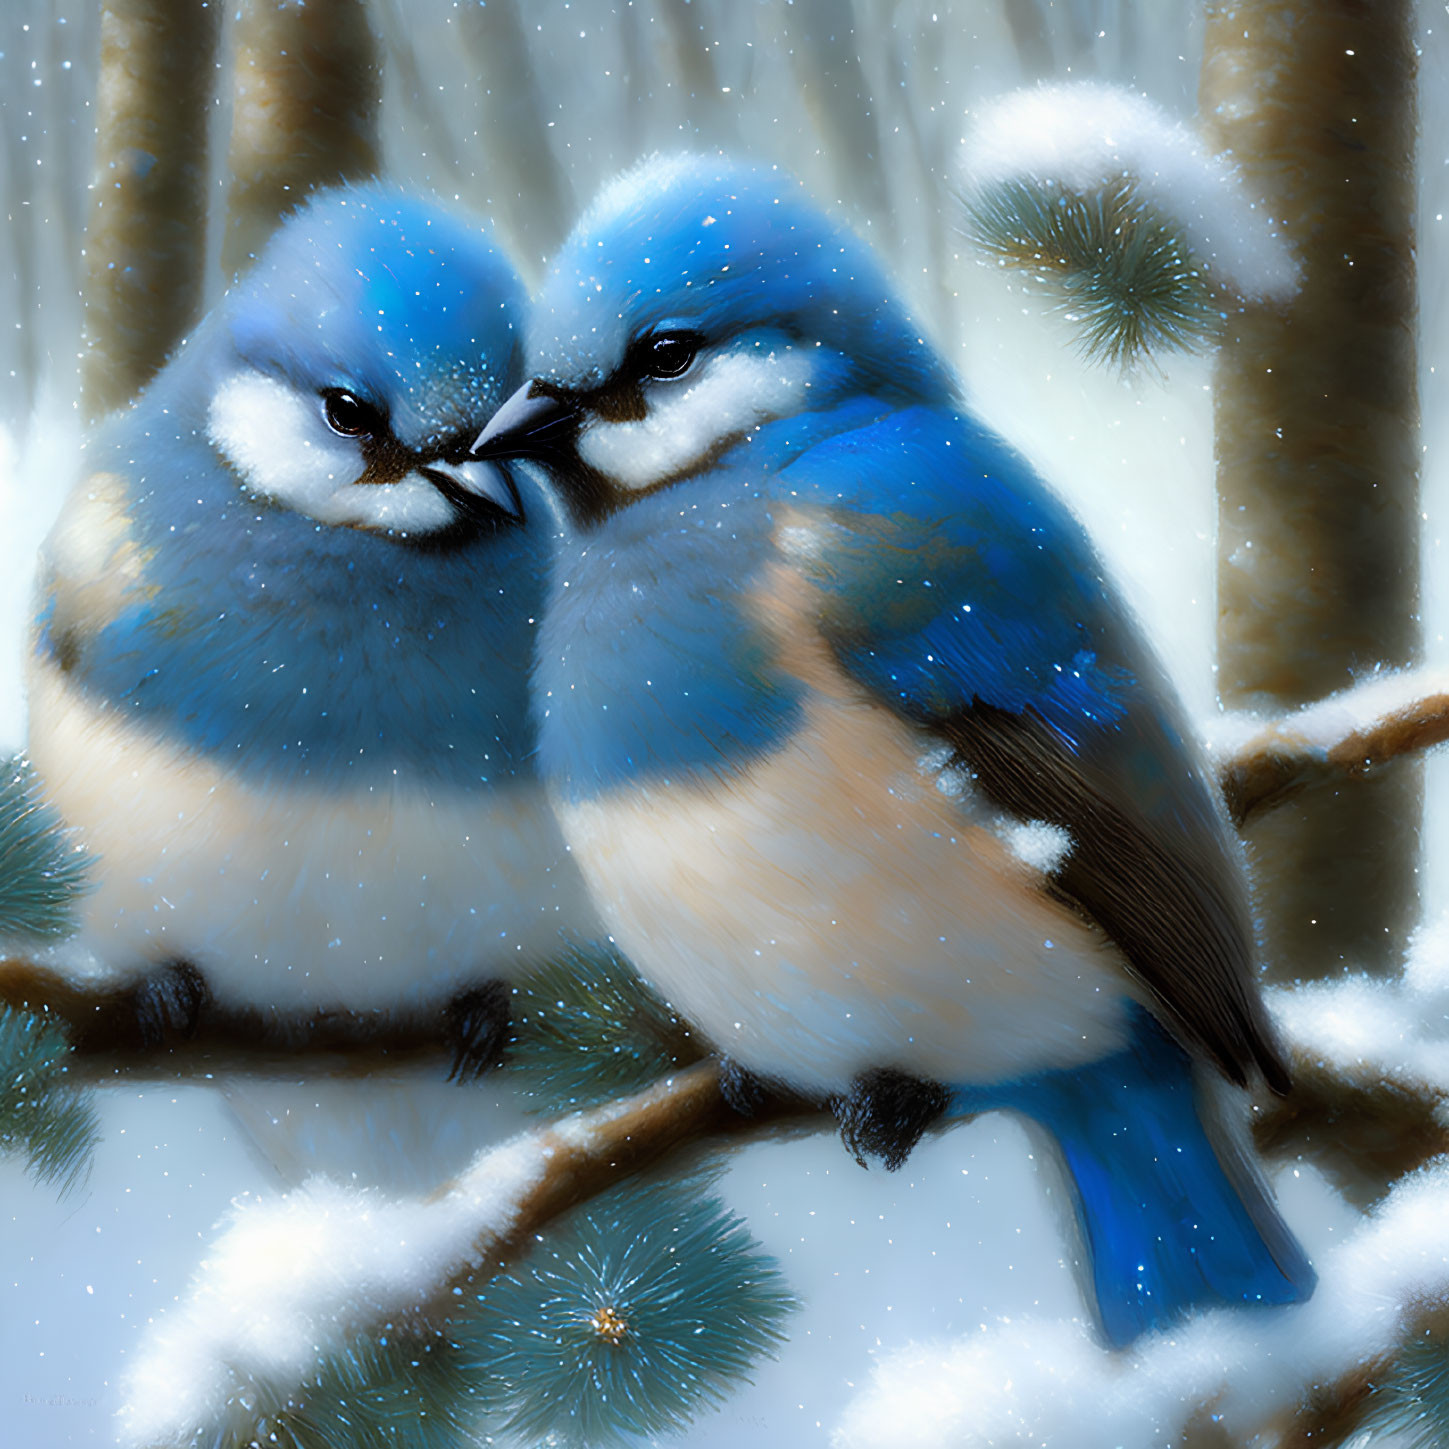 Vibrant blue and orange birds on snowy branch in wintry forest